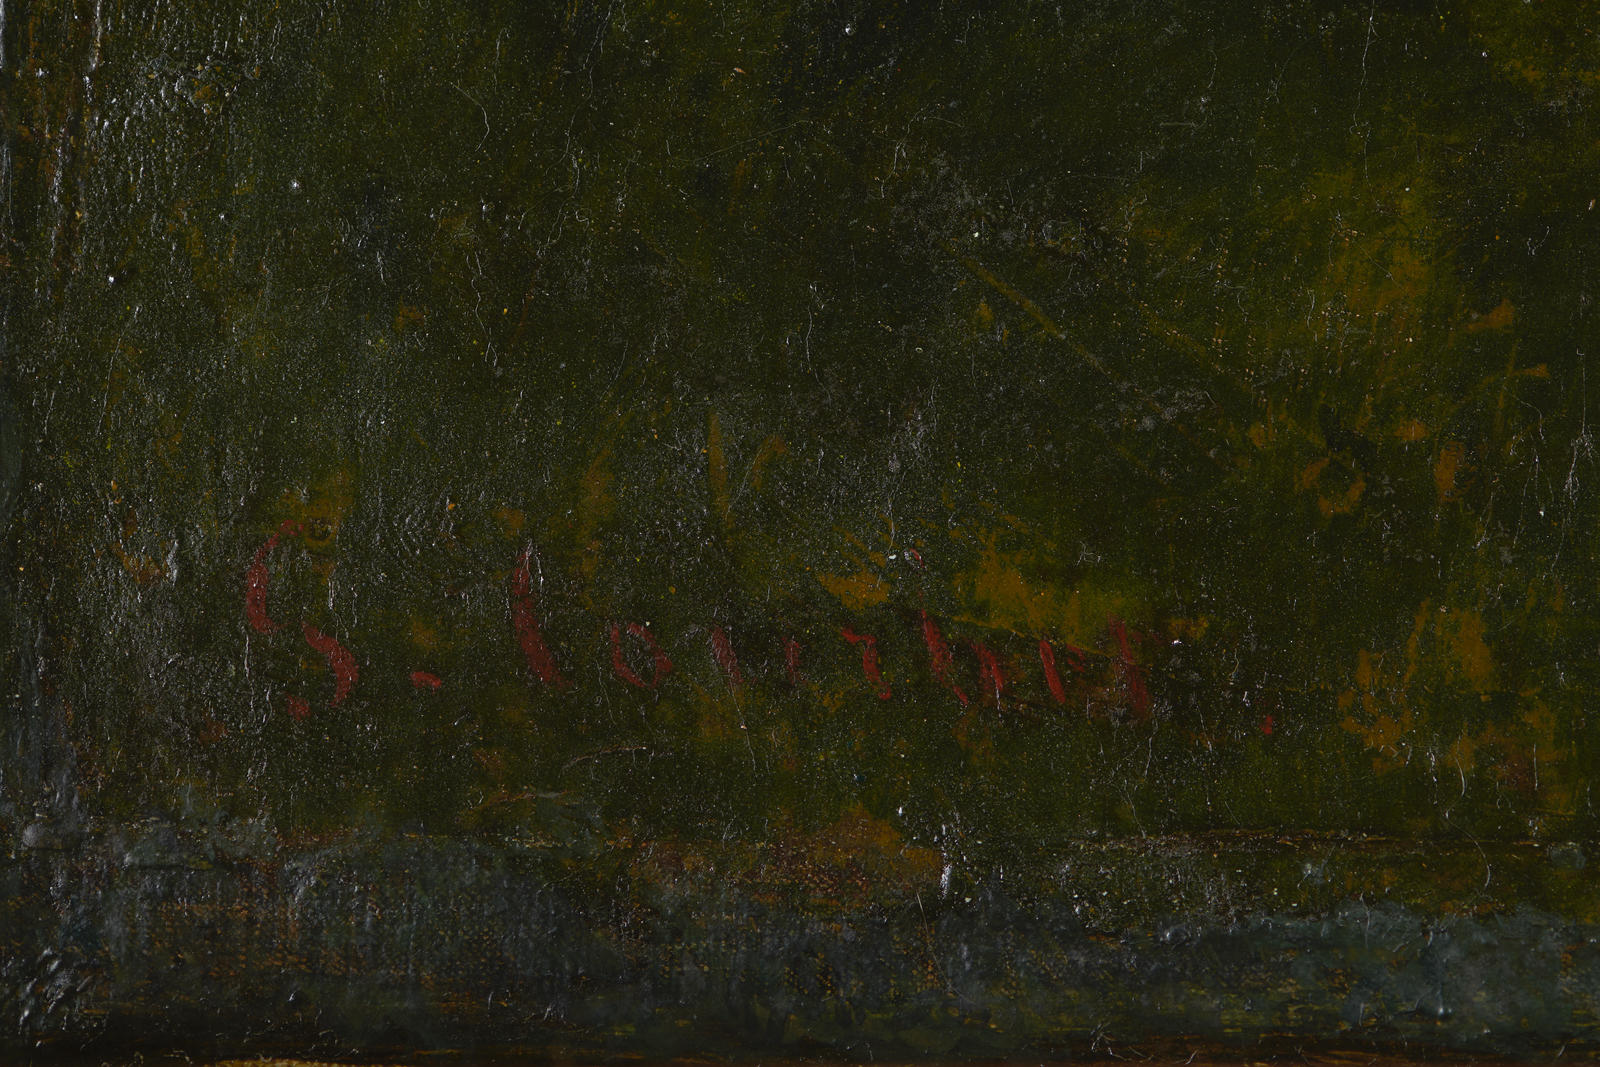 A photograph of a close up of Gustave Courbet’s signature in red oil paint on dark green oil paint.